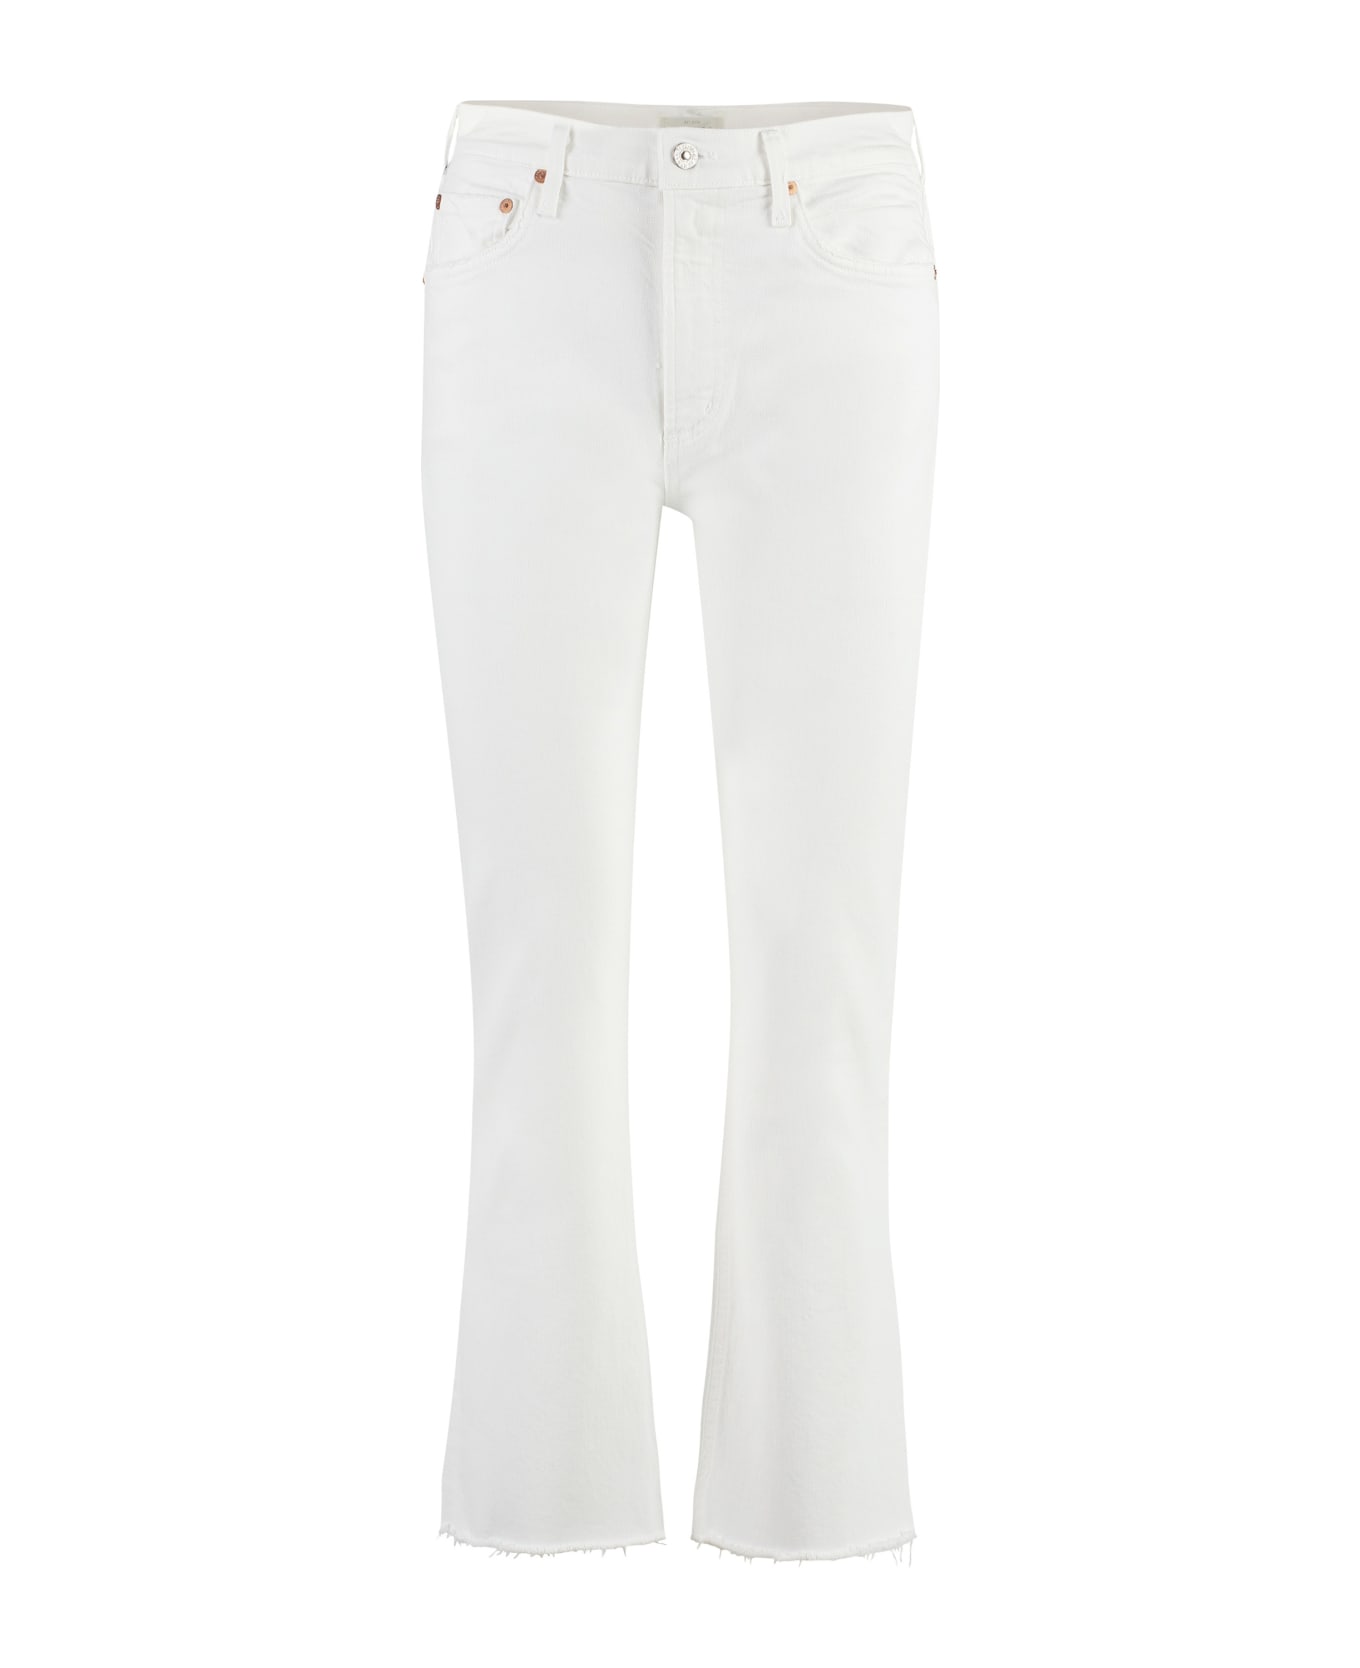 Citizens of Humanity Isola Jeans - MAYFAIR WHITE